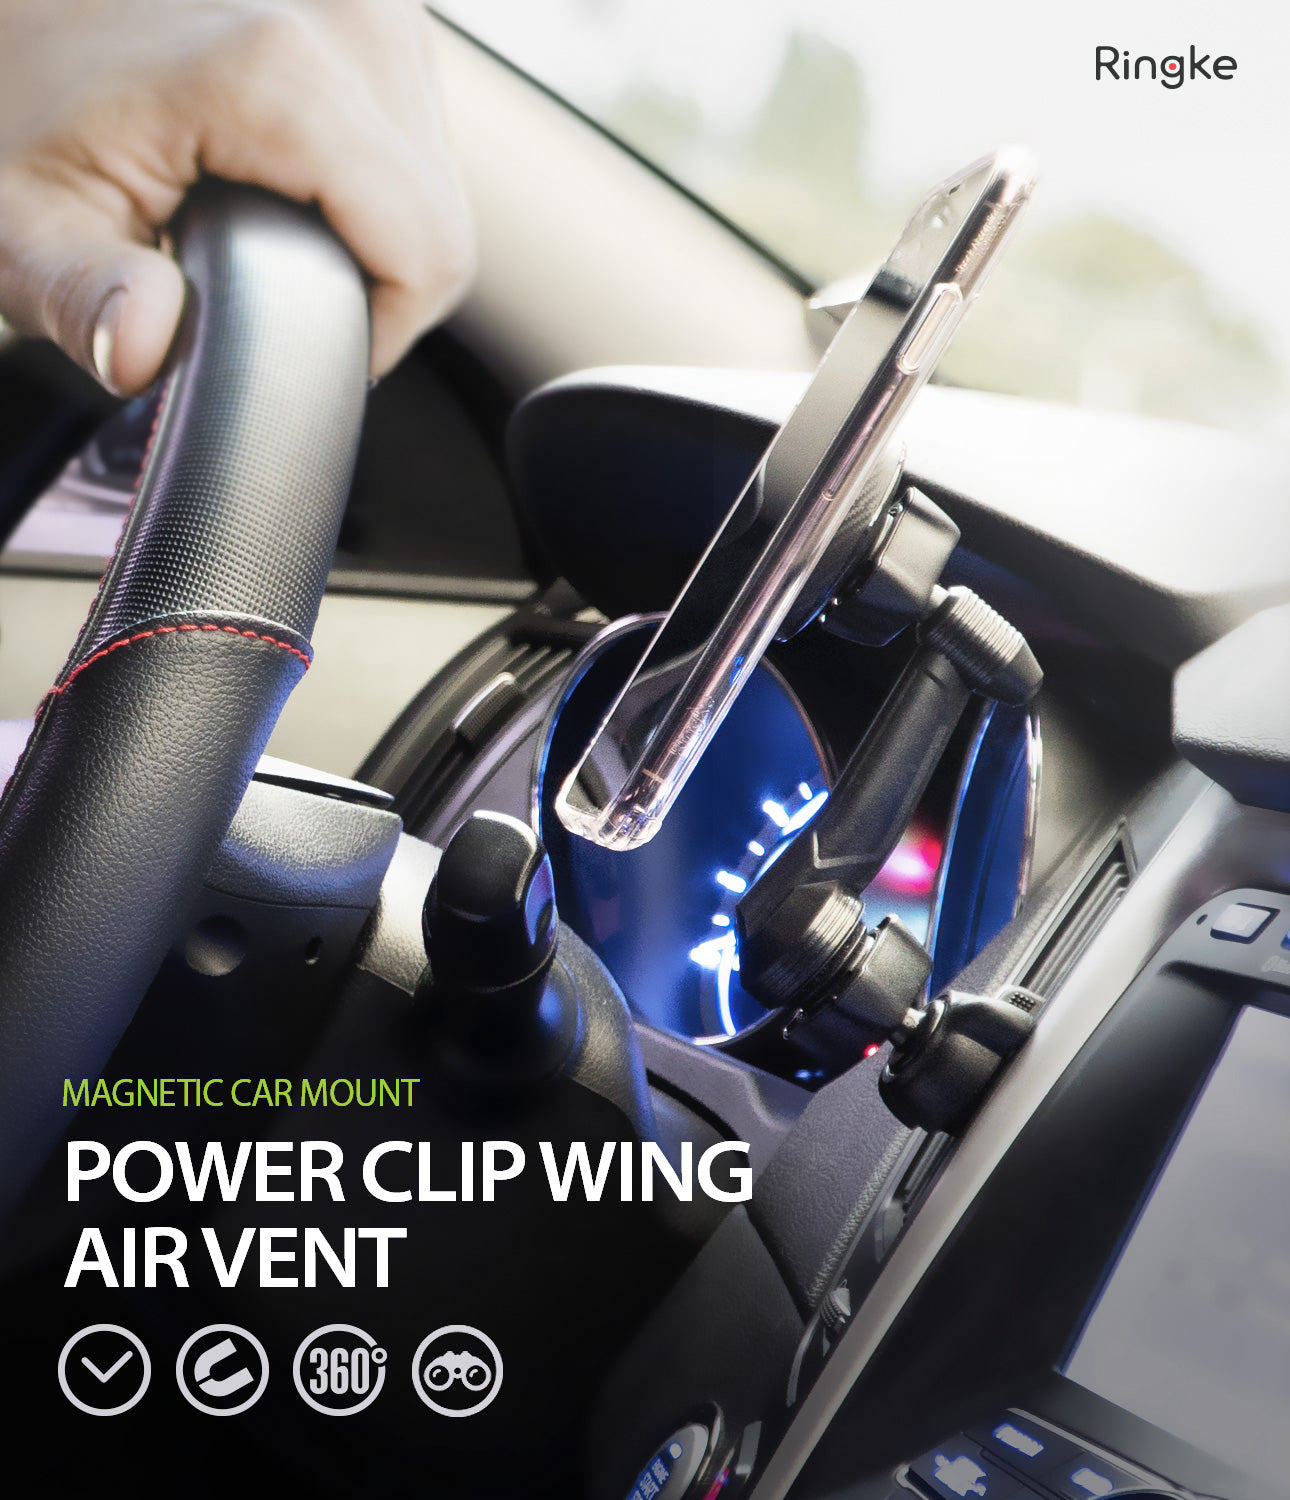 Ringke Power Clip Wing Car Mount phone holder mount air vent with strong magnetic head